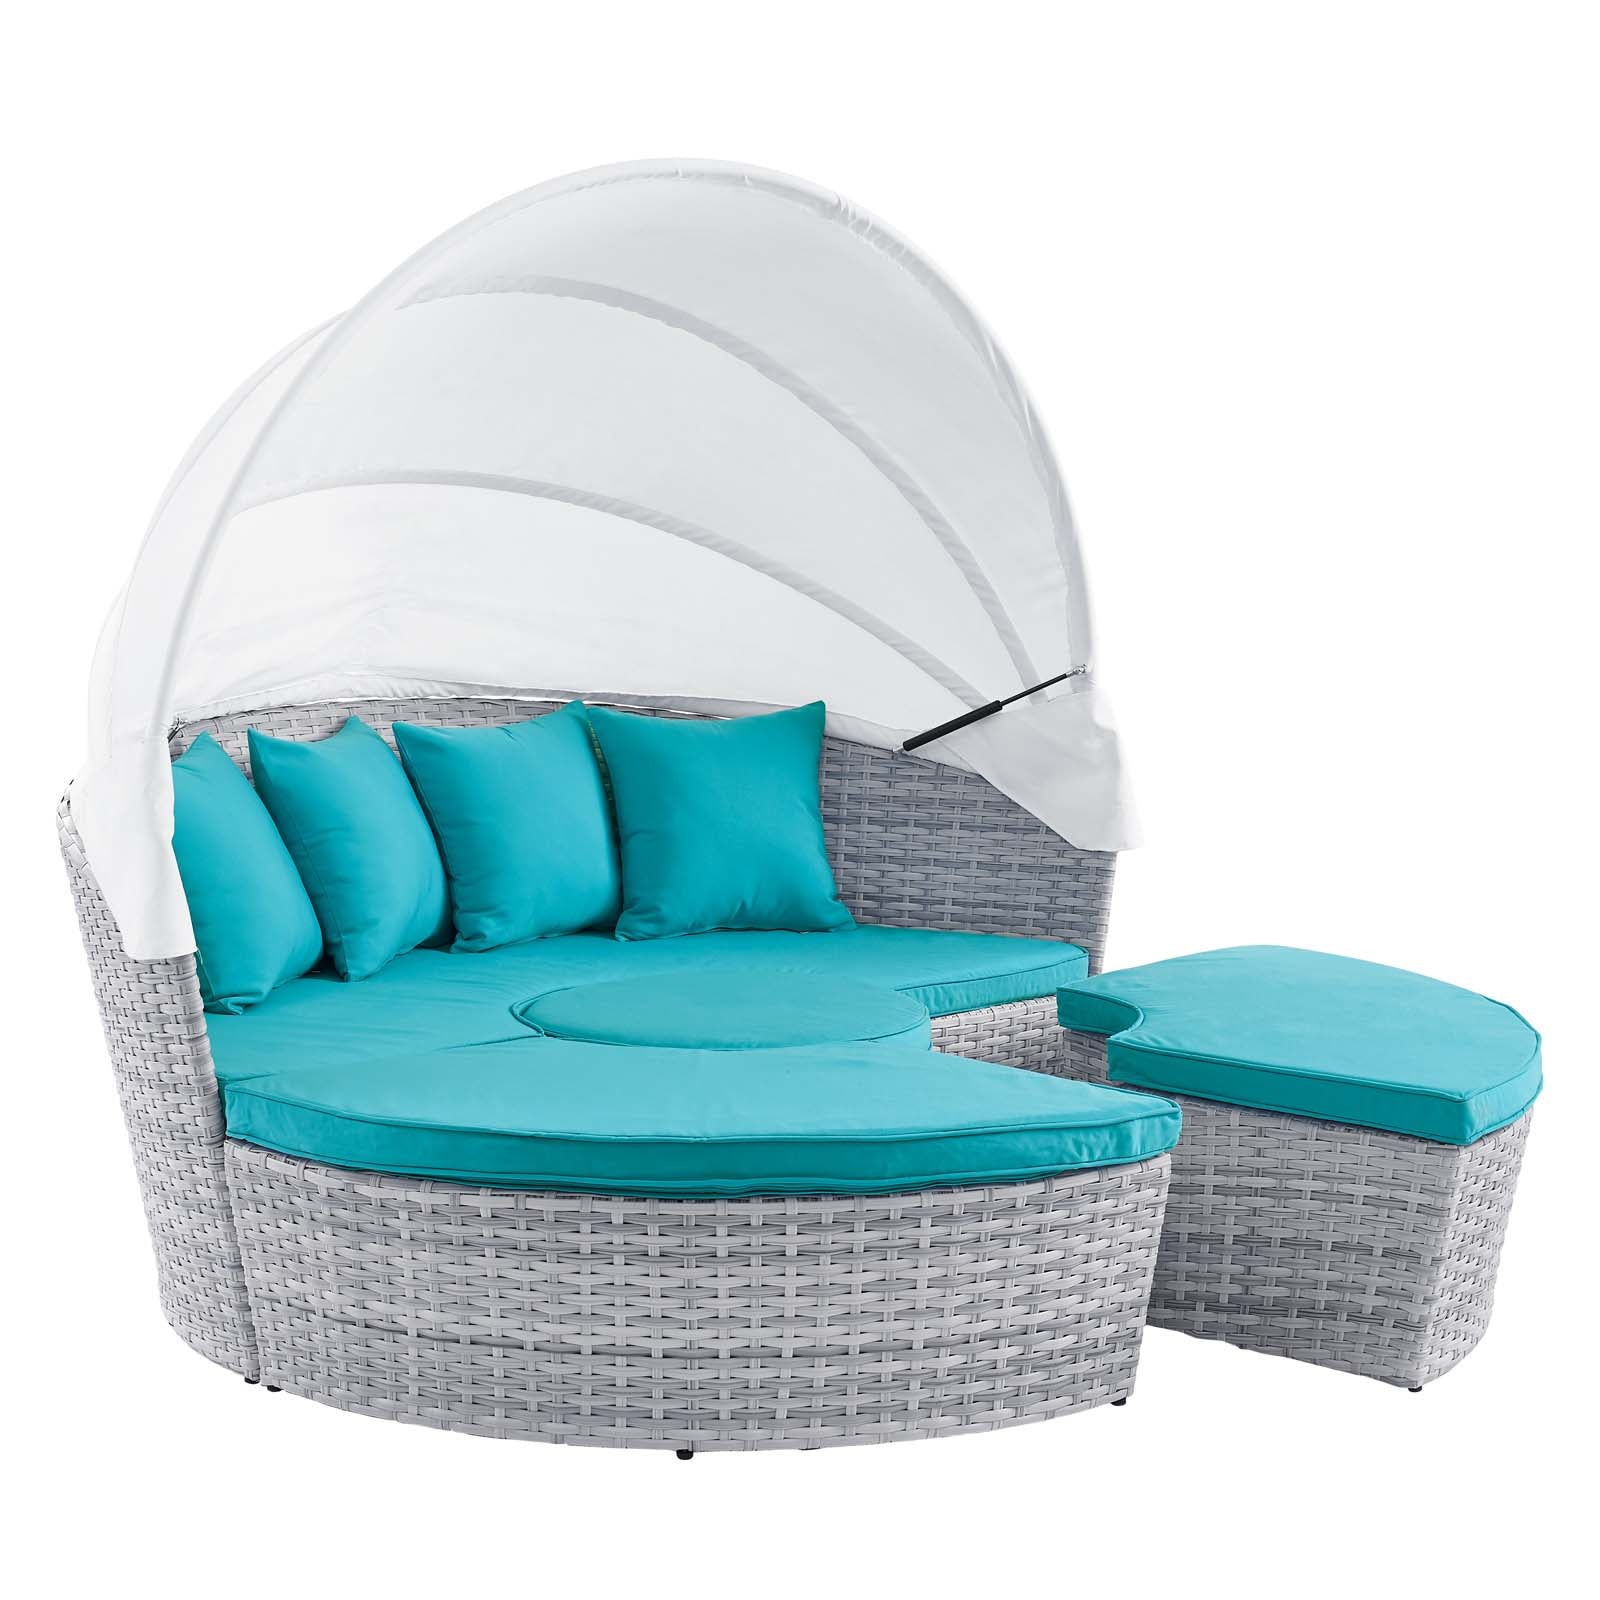 Scottsdale Canopy Sunbrella® Outdoor Patio Daybed - East Shore Modern Home Furnishings